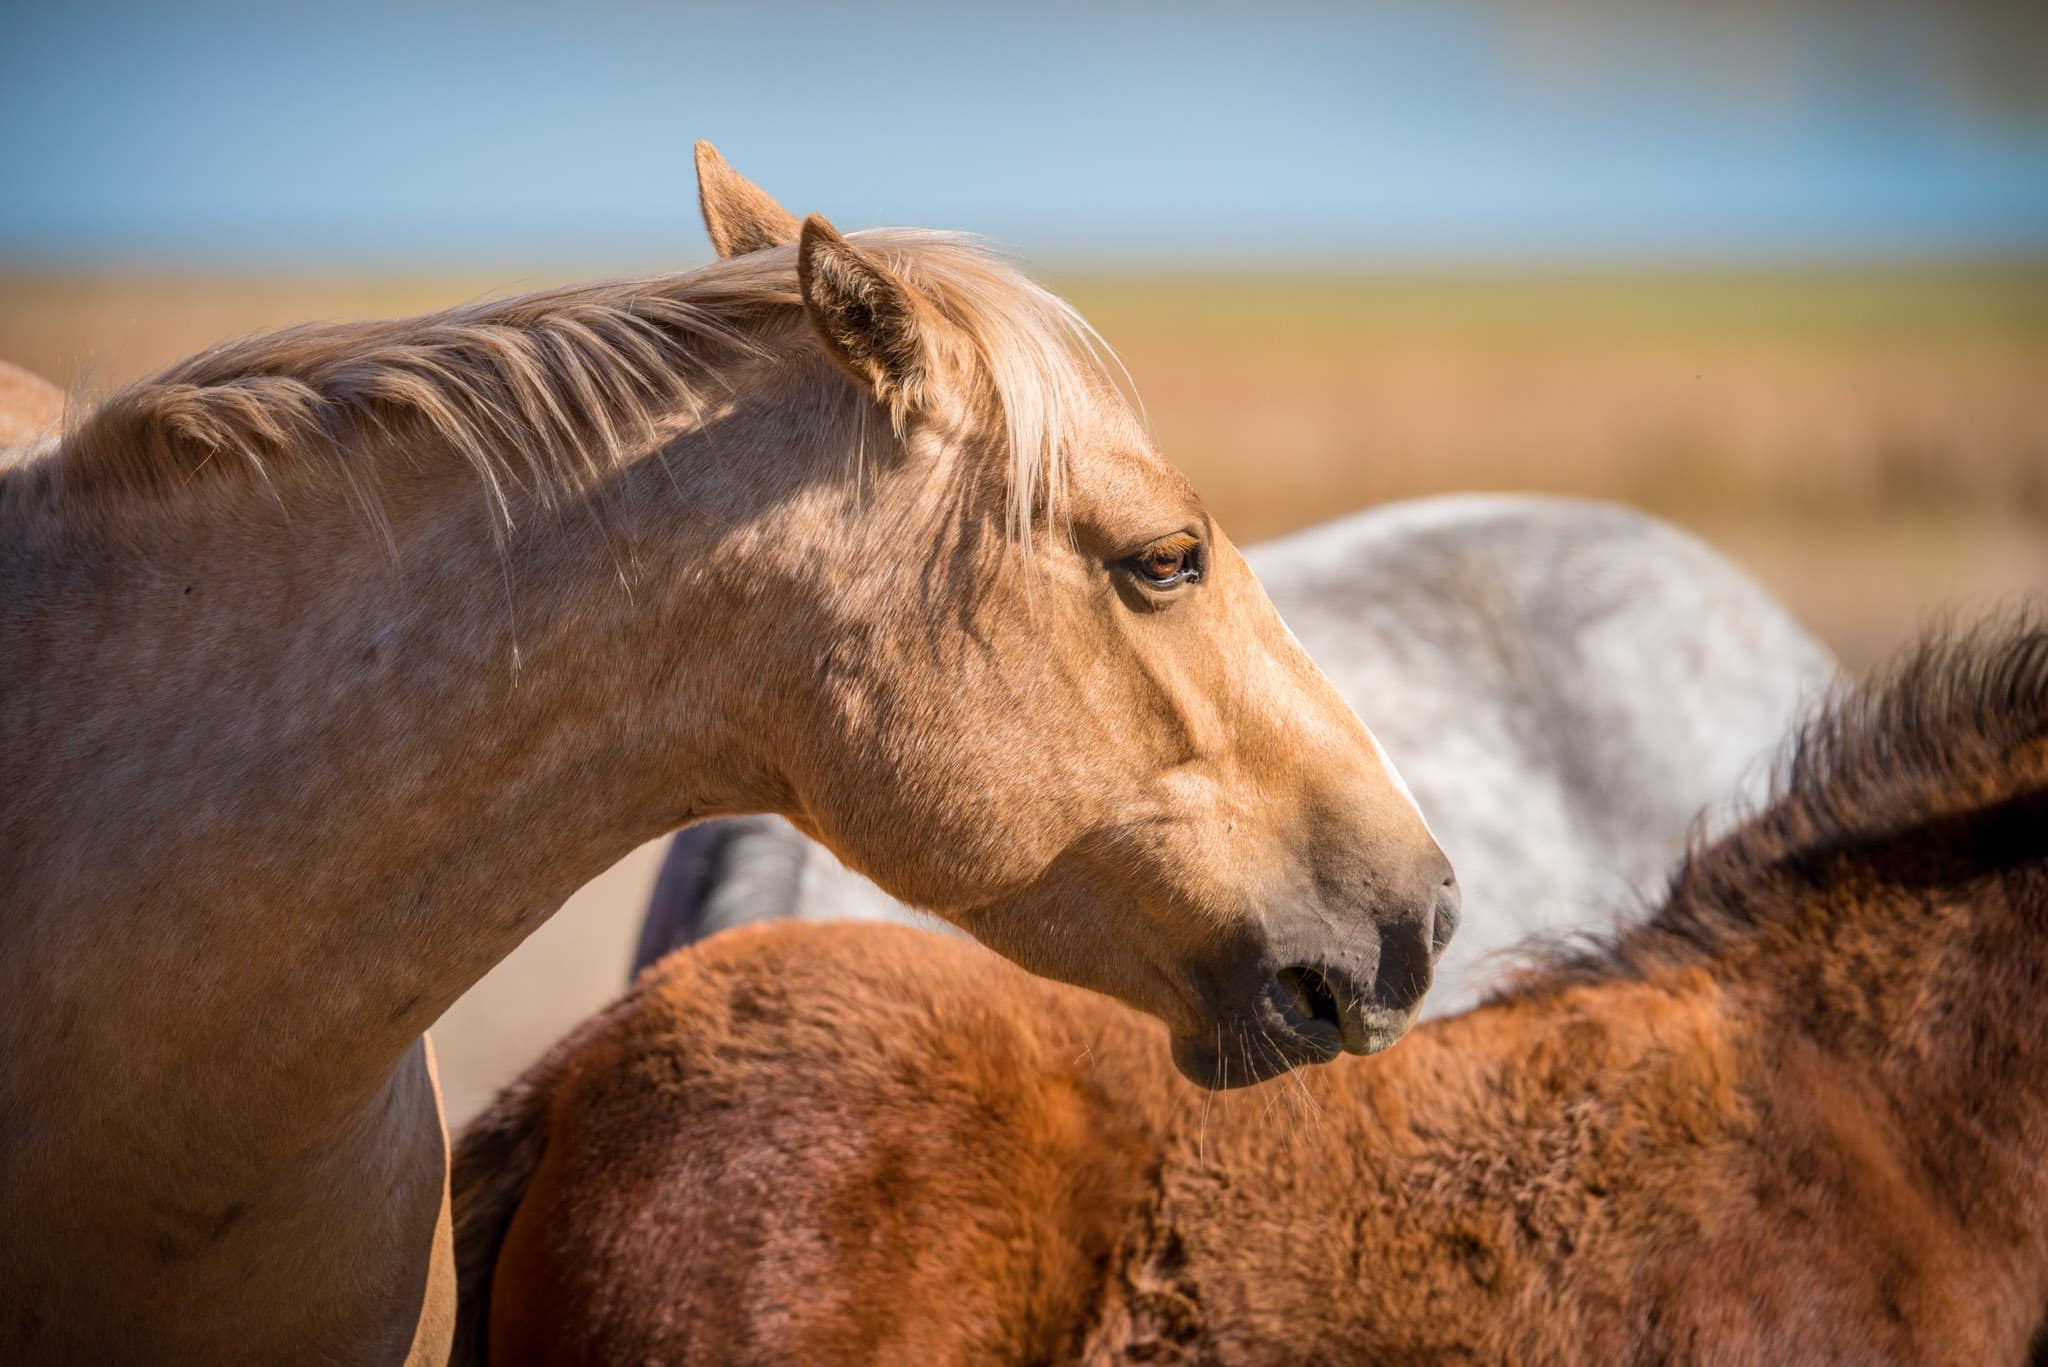 This close-up of a wild horse was taken on BLM land near San Luis, Colorado.